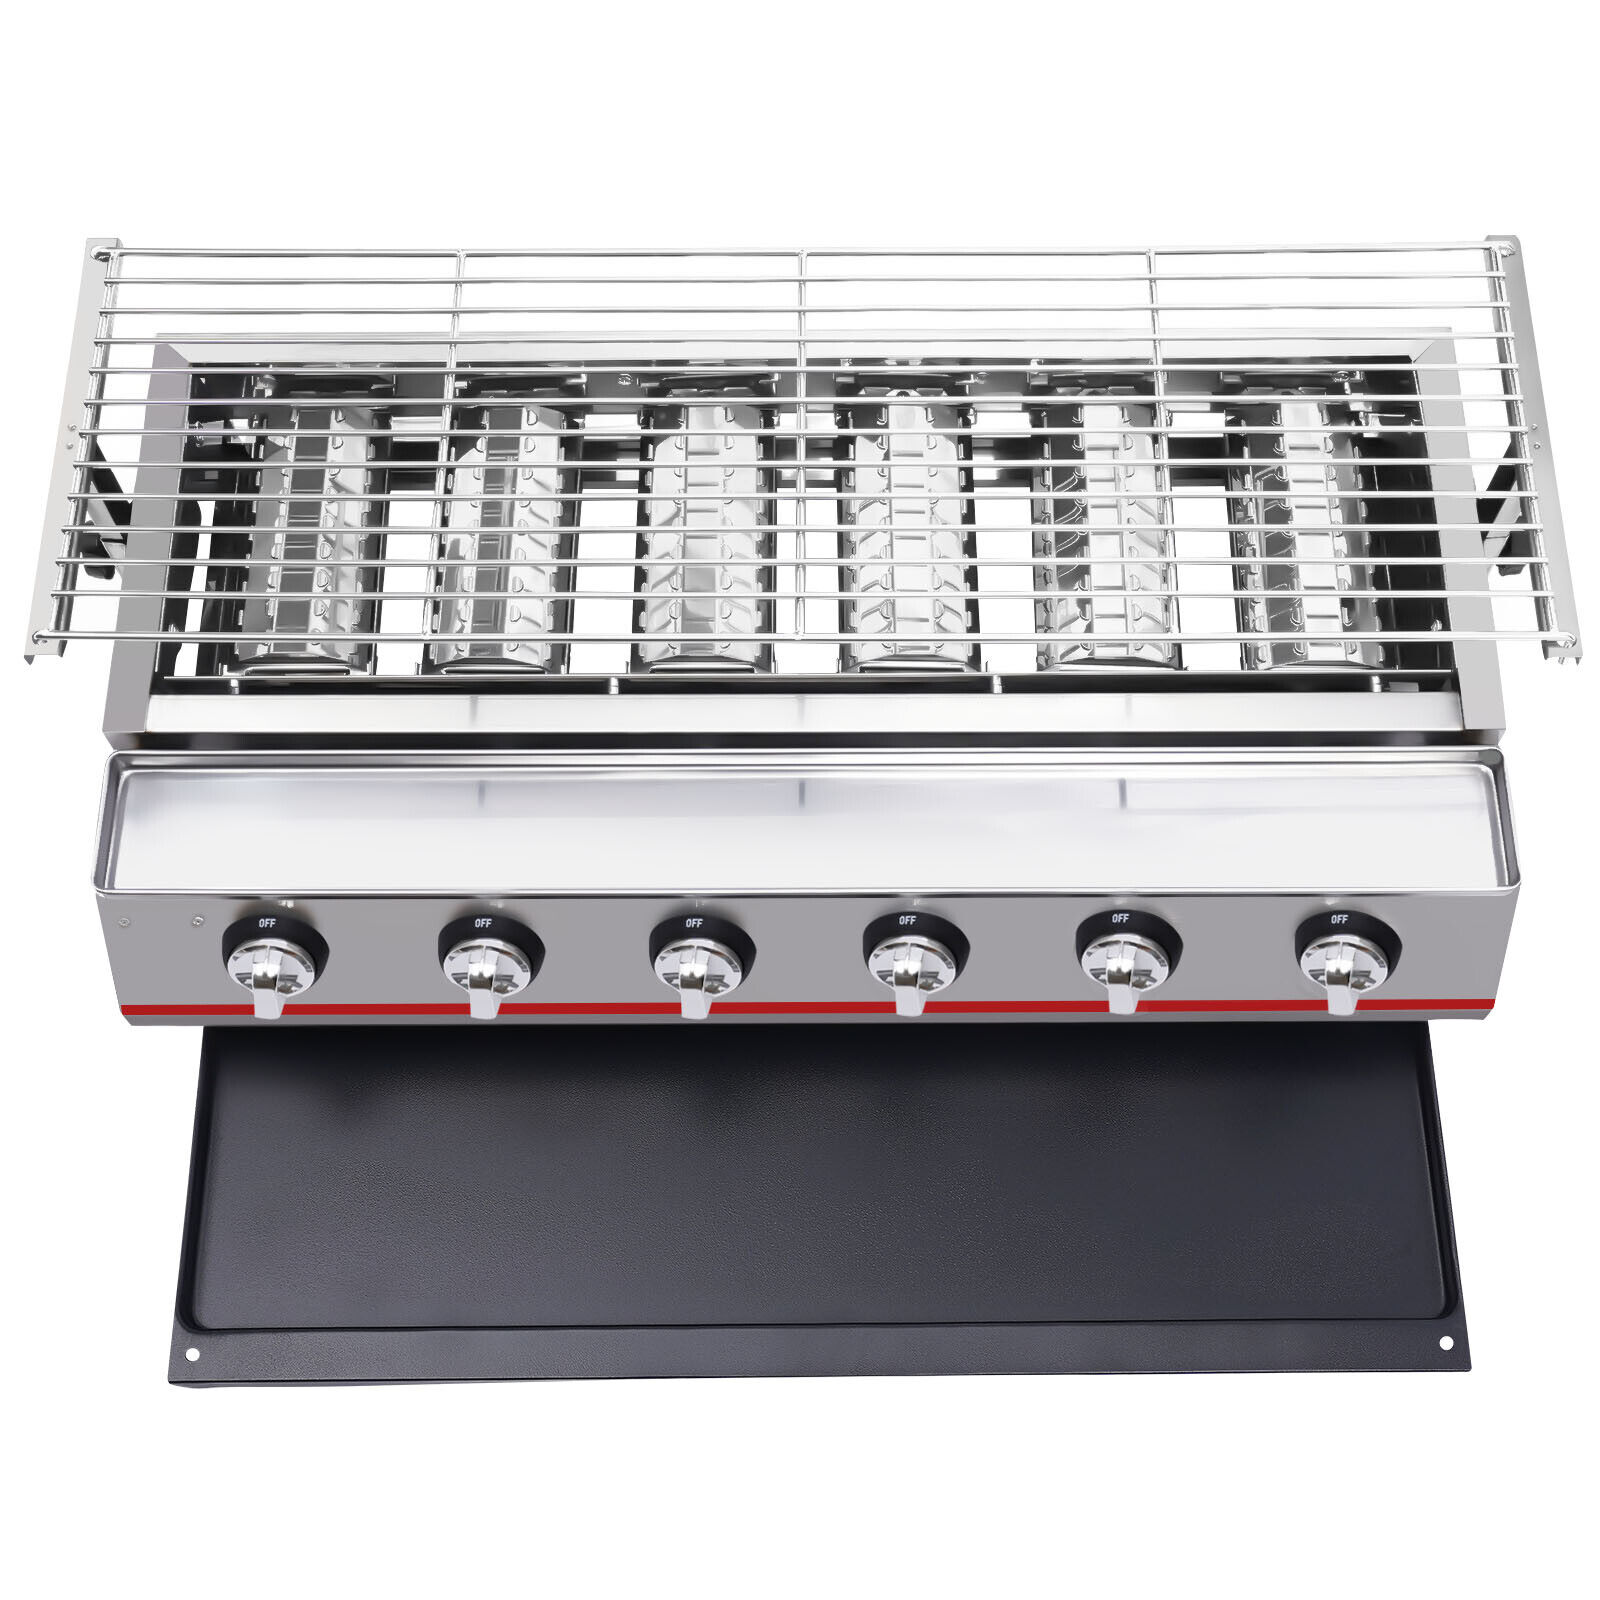 6-Burner BBQ Gas Grill Stainless Steel LPG Tabletop Camping Grill 31.5",Commercial Gas LPG Grill 2800PA Outdoor BBQ Tabletop Cooker 6 Burner - image 1 of 12